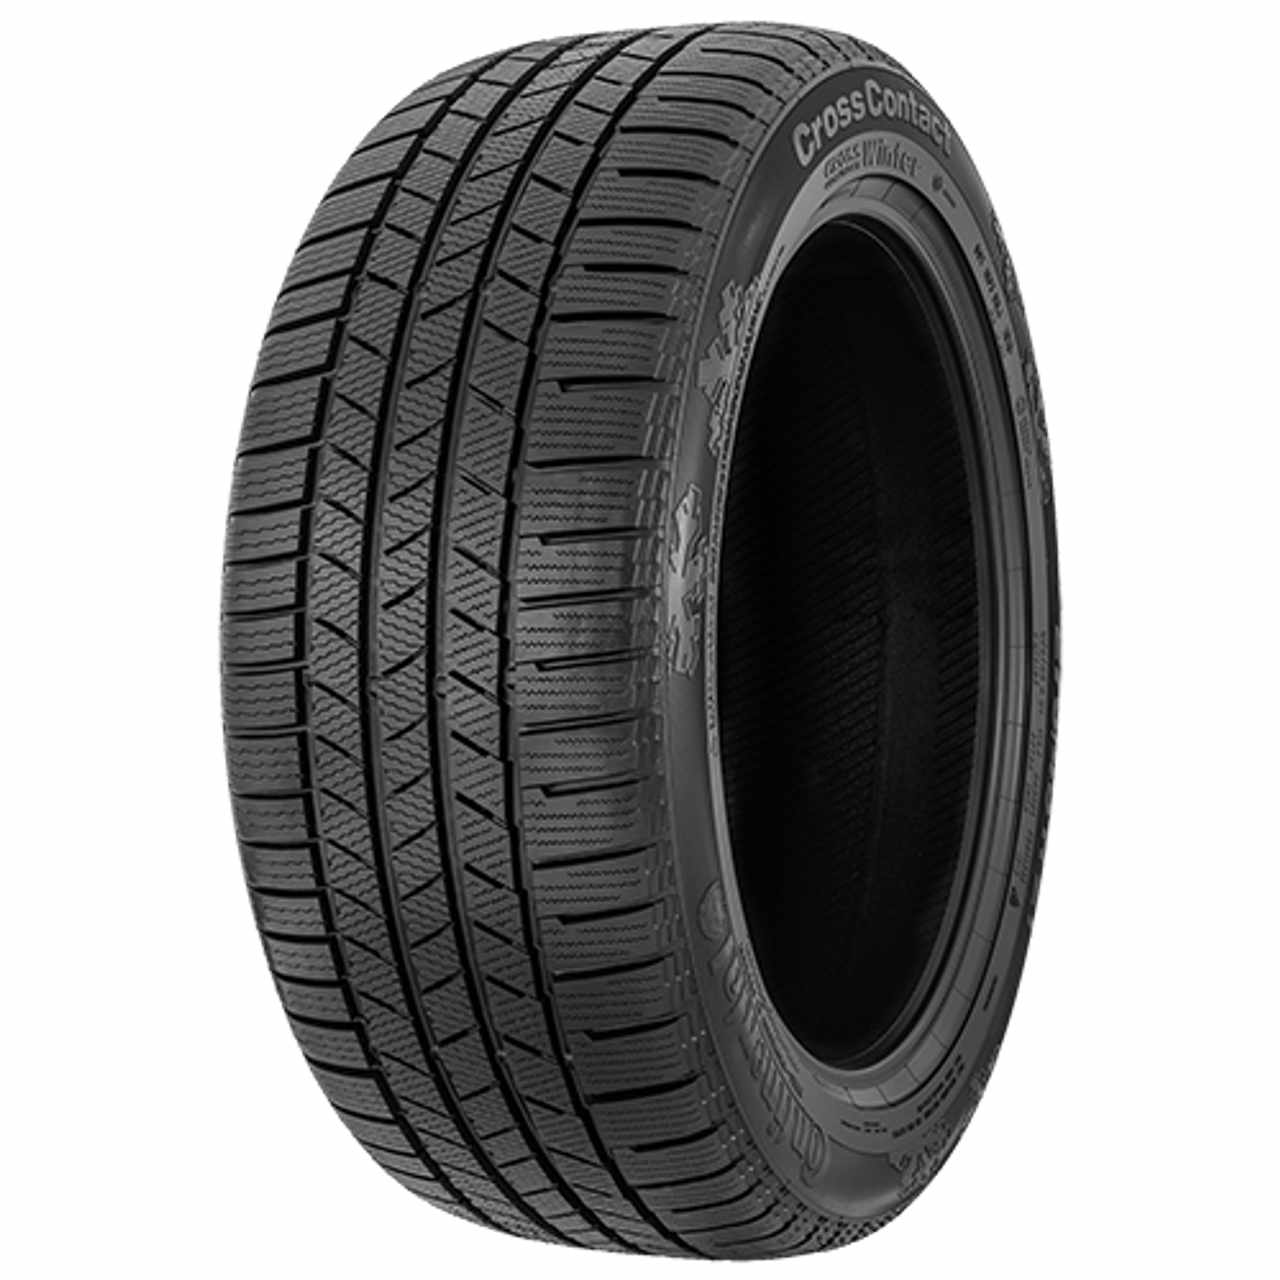 CONTINENTAL CONTICROSSCONTACT WINTER 235/65R18 110H BSW XL